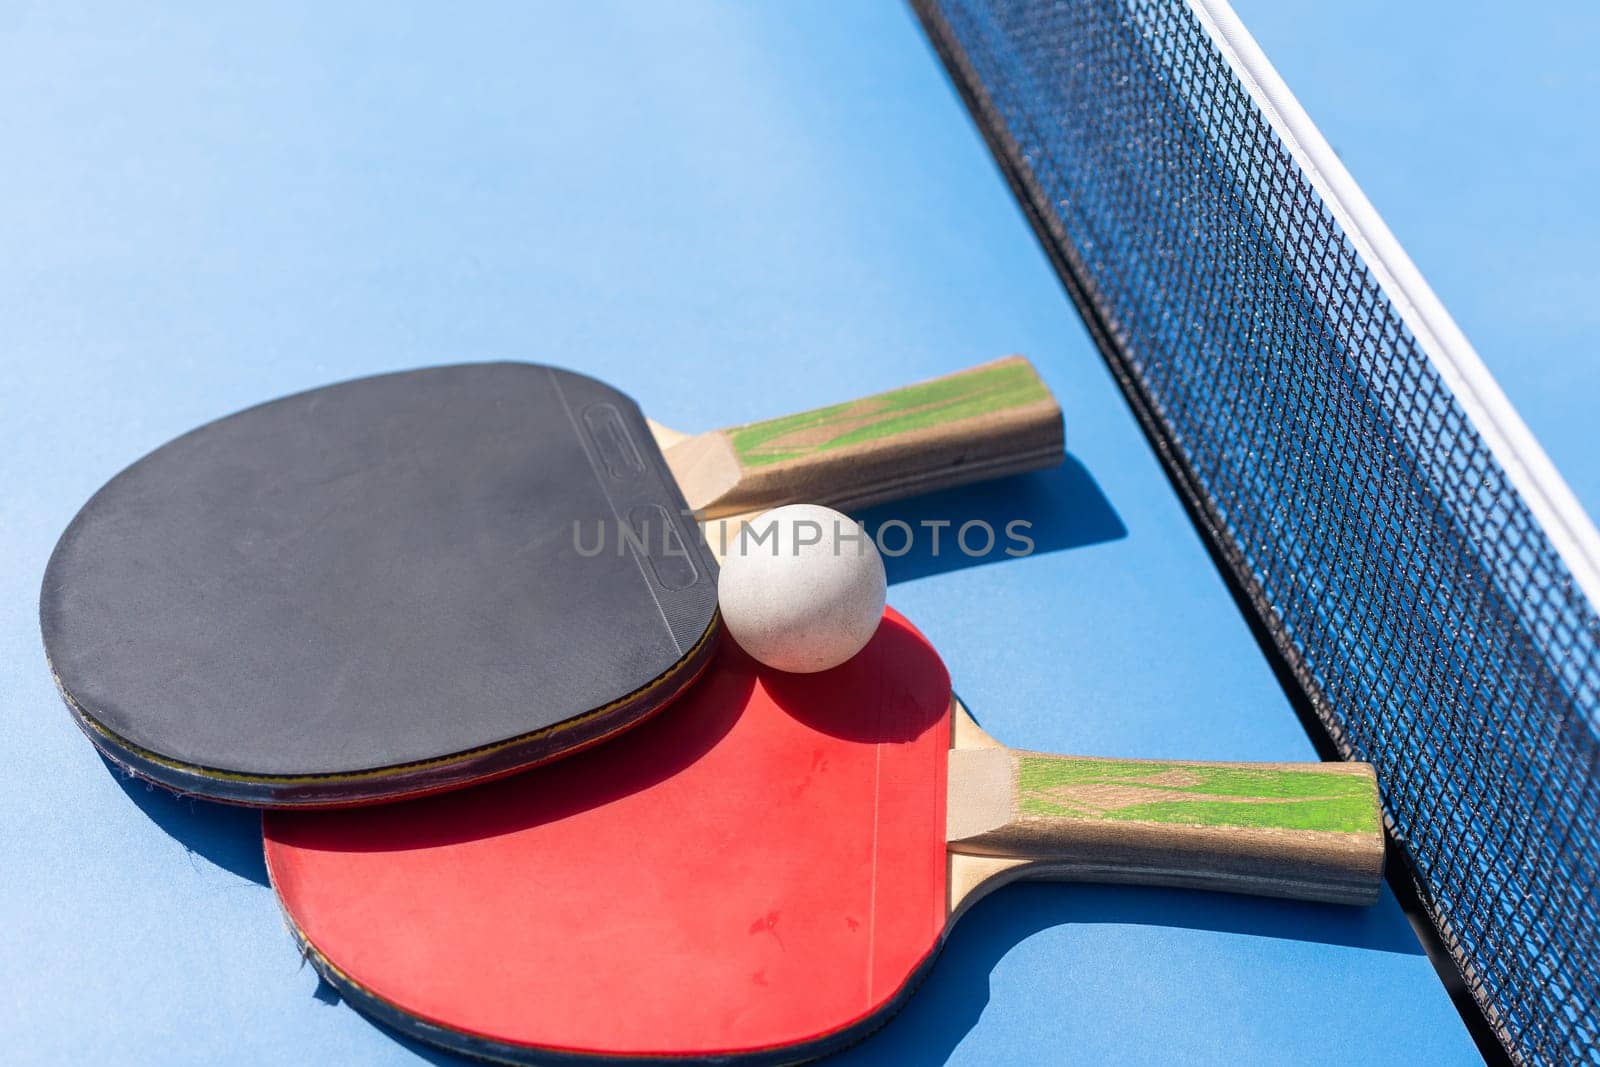 table tennis ball and paddle by Andelov13